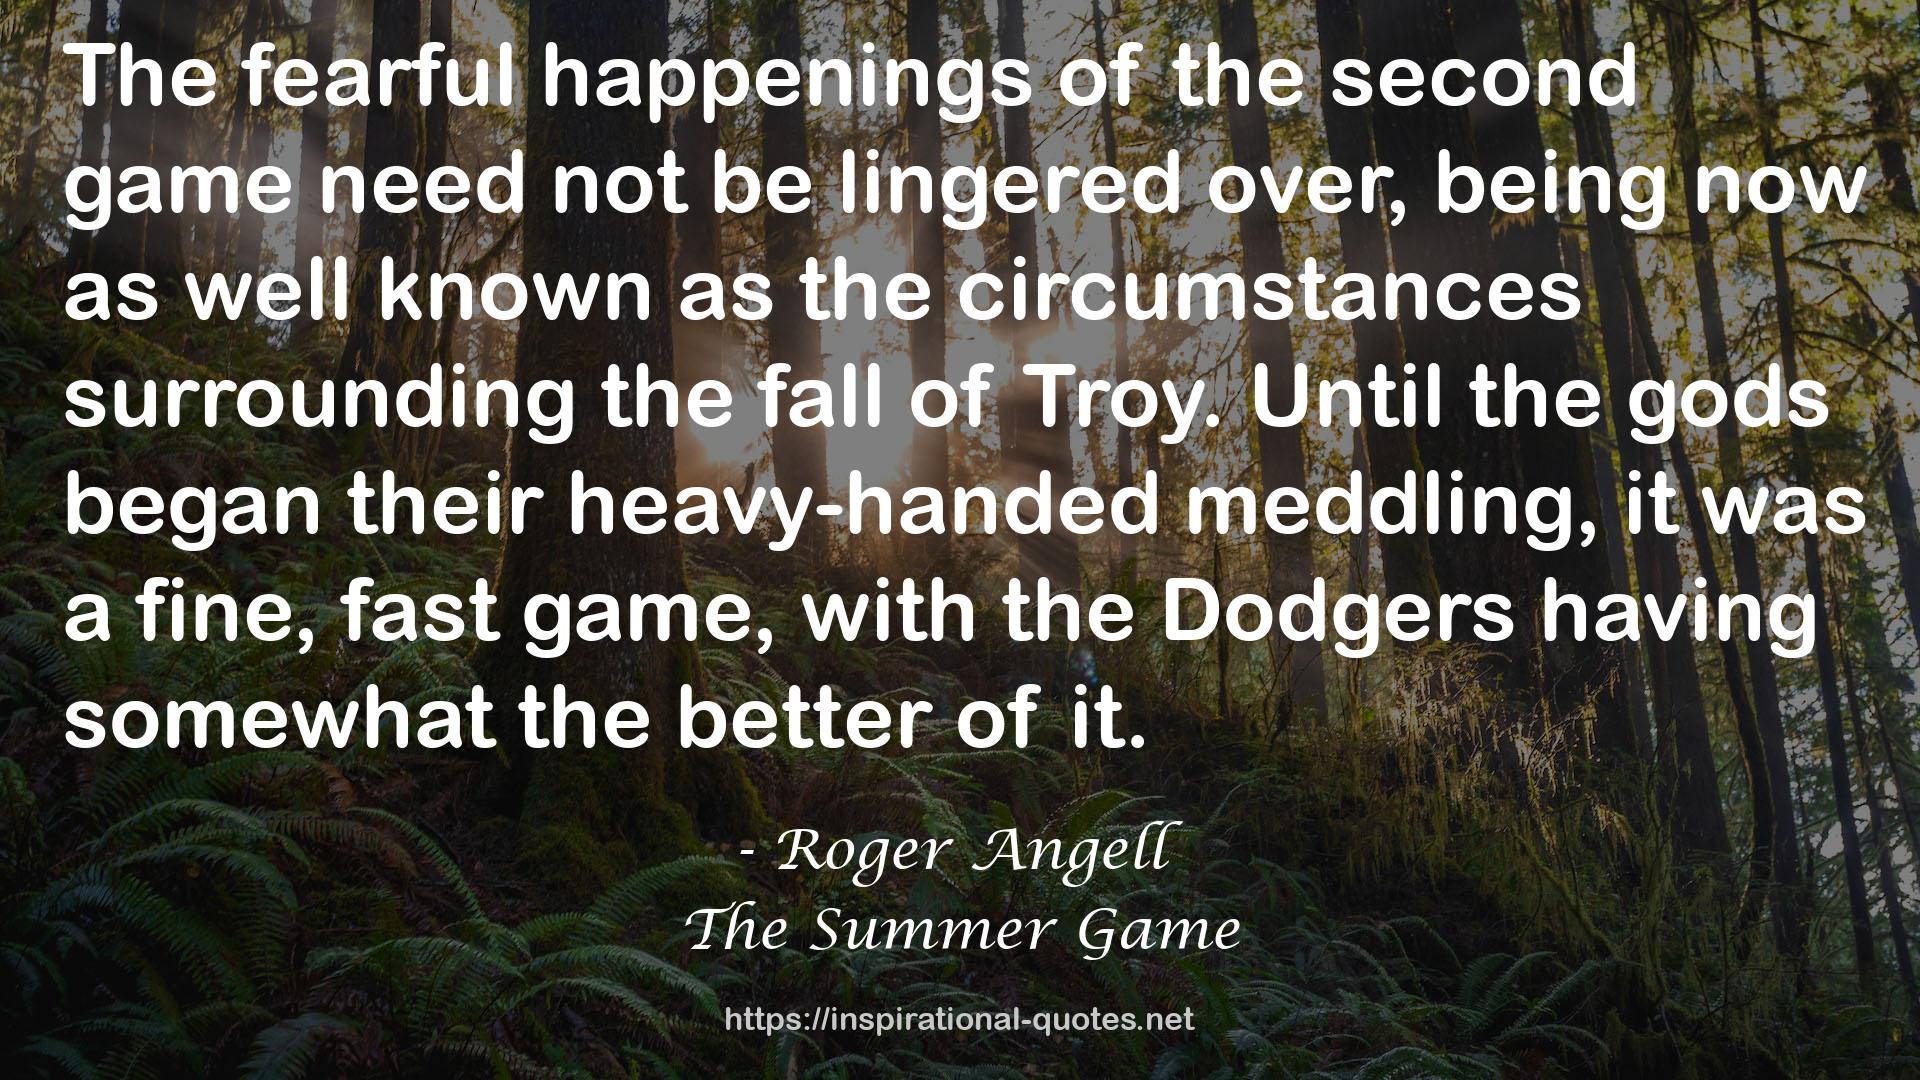 The Summer Game QUOTES